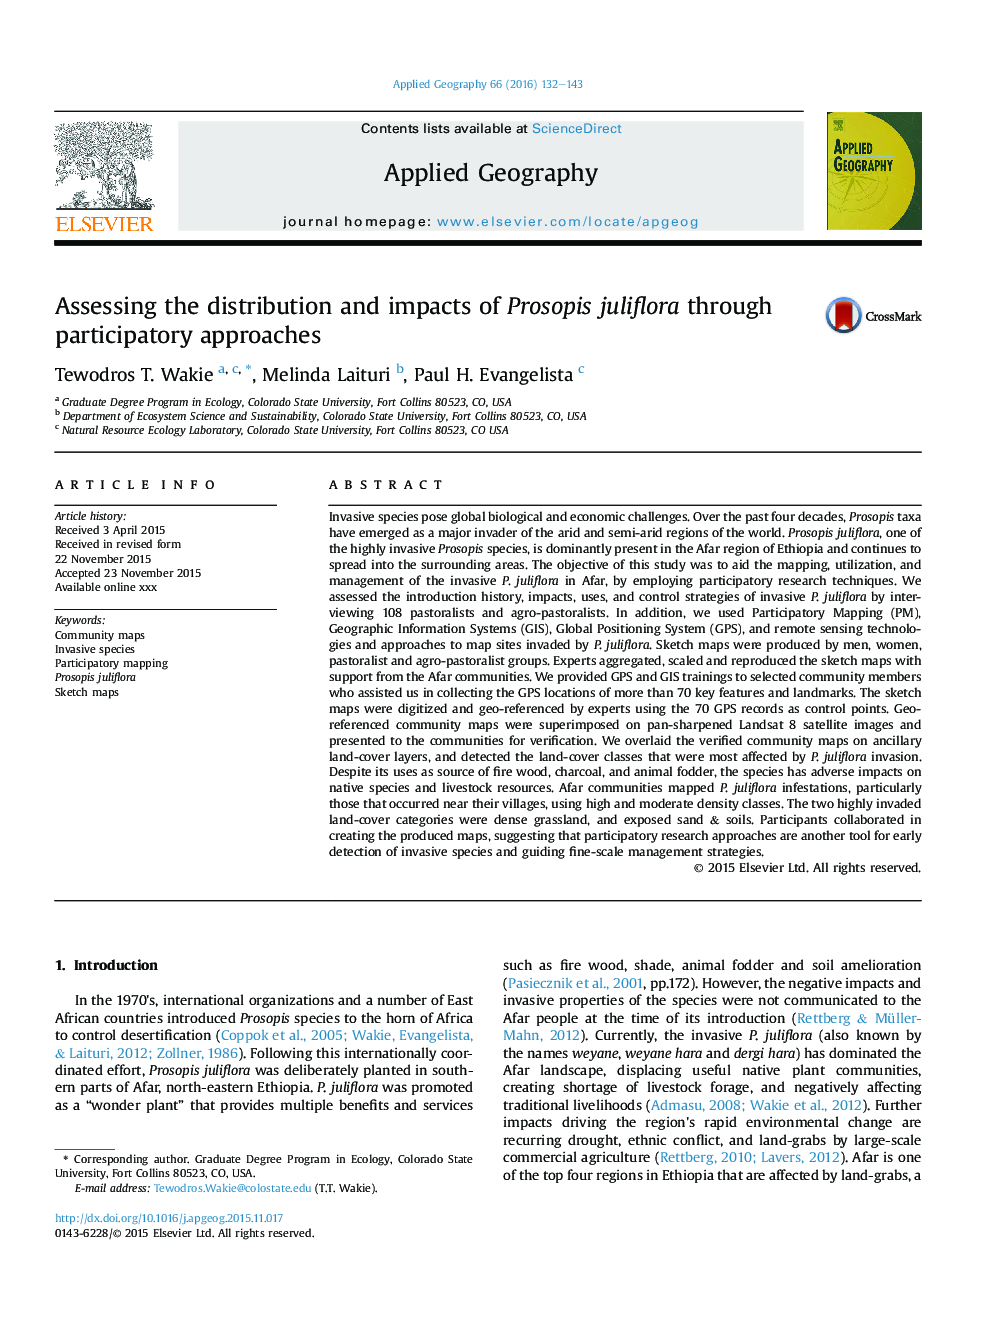 Assessing the distribution and impacts of Prosopis juliflora through participatory approaches